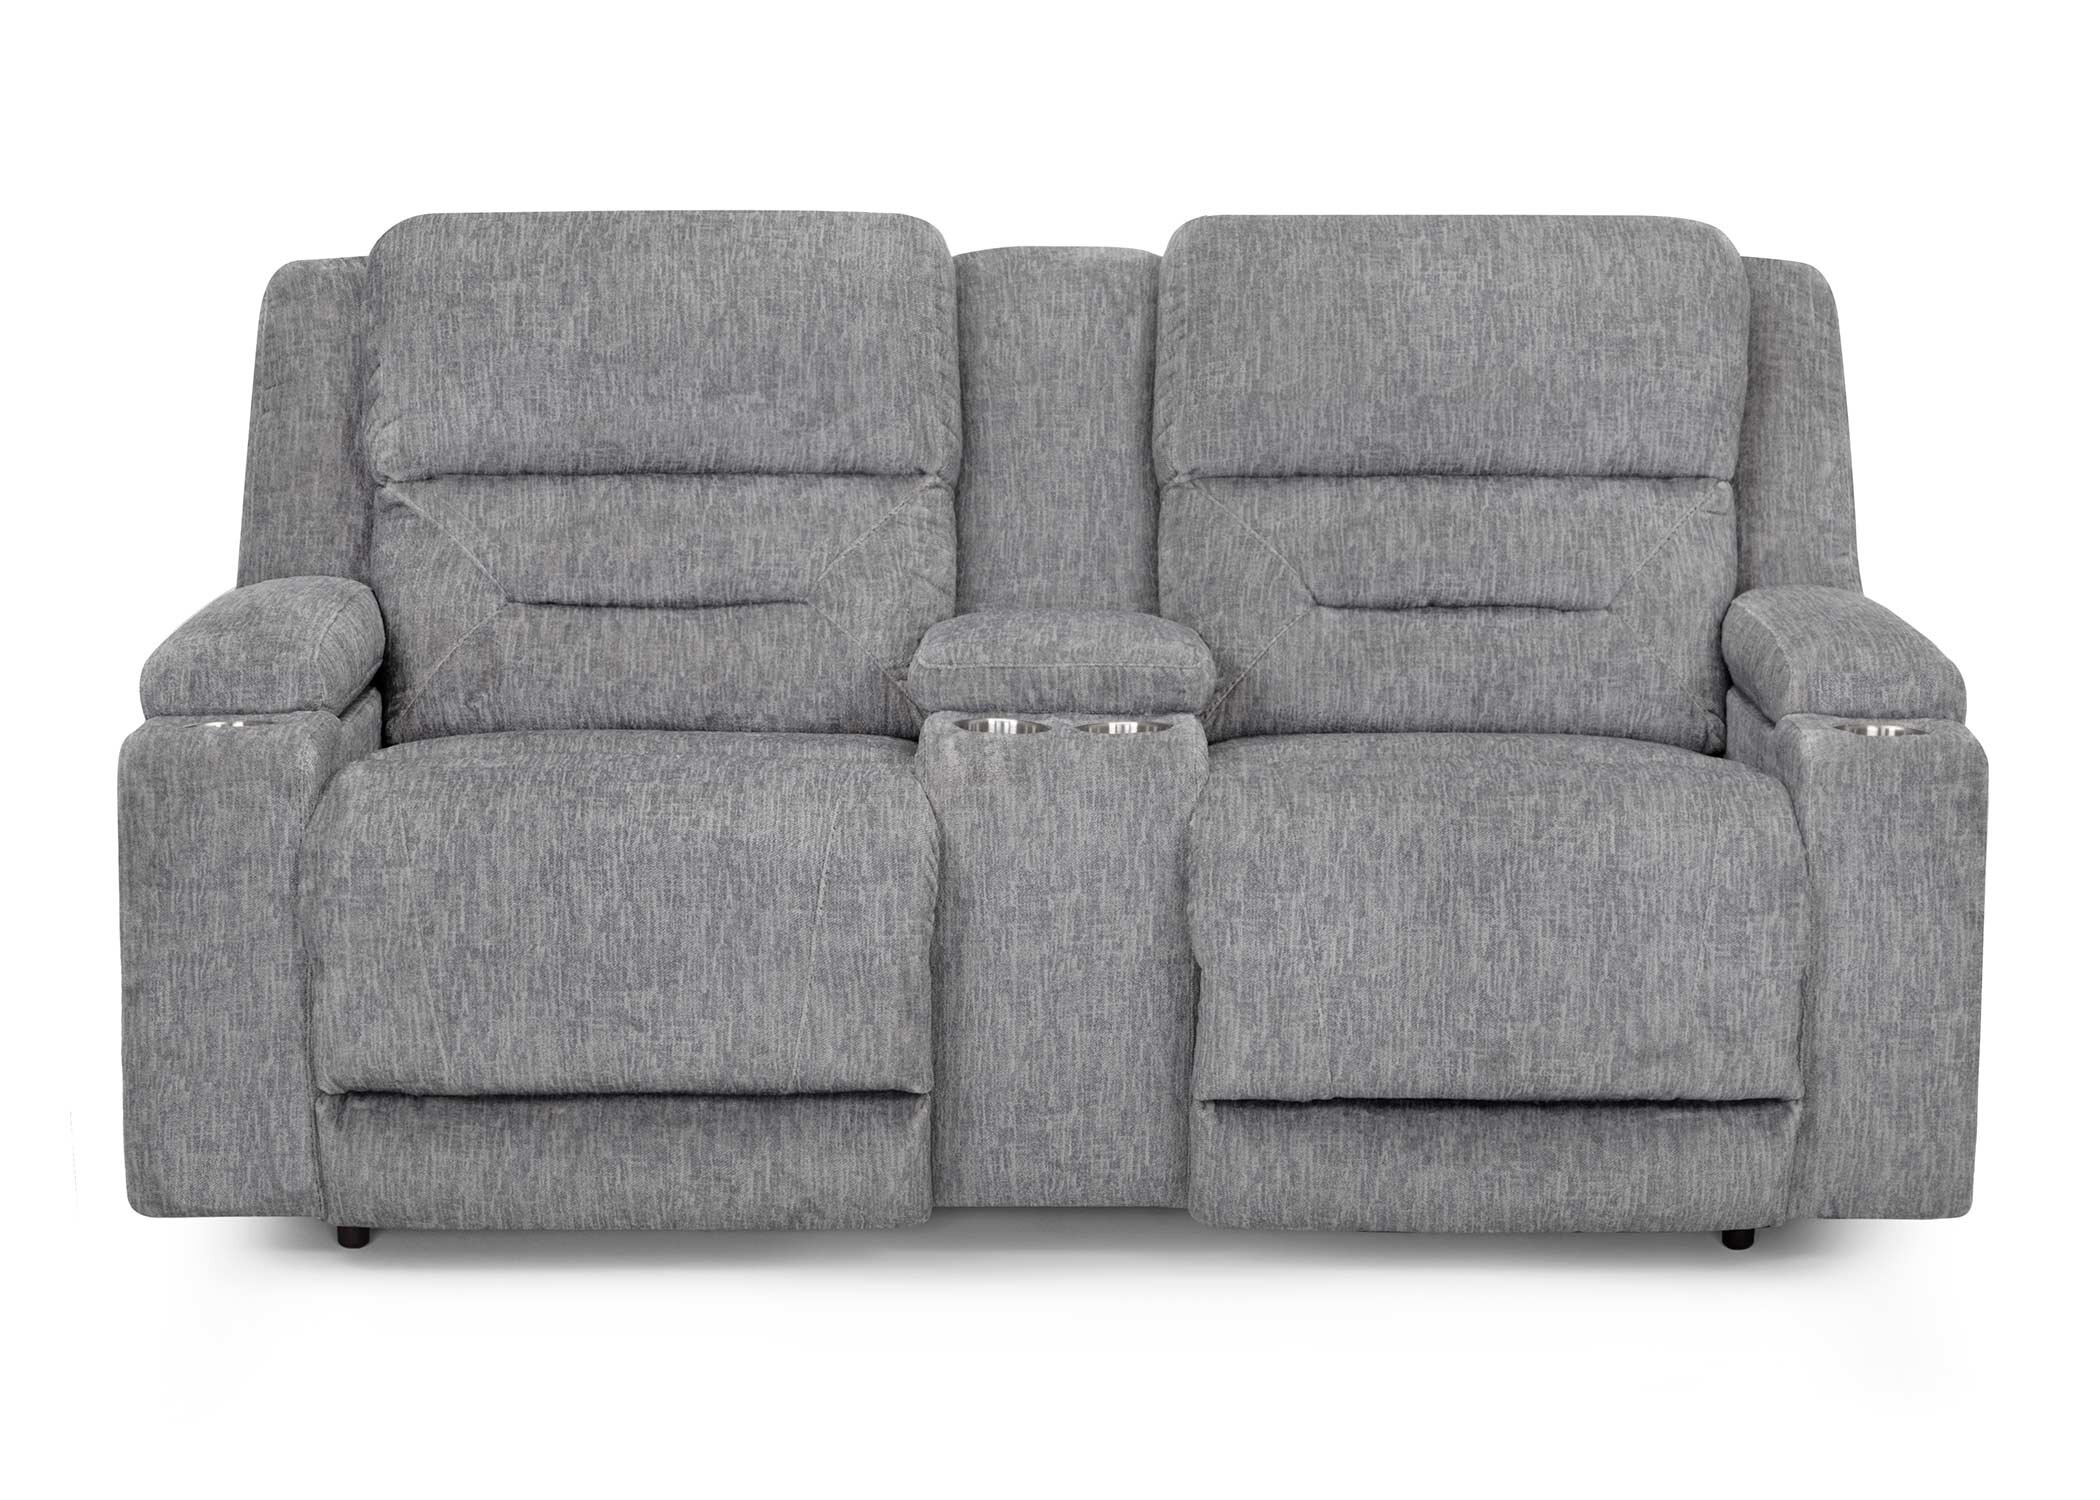  65235 Ace Reclining Console Loveseat in 1015-06 Plush Gray - Front 